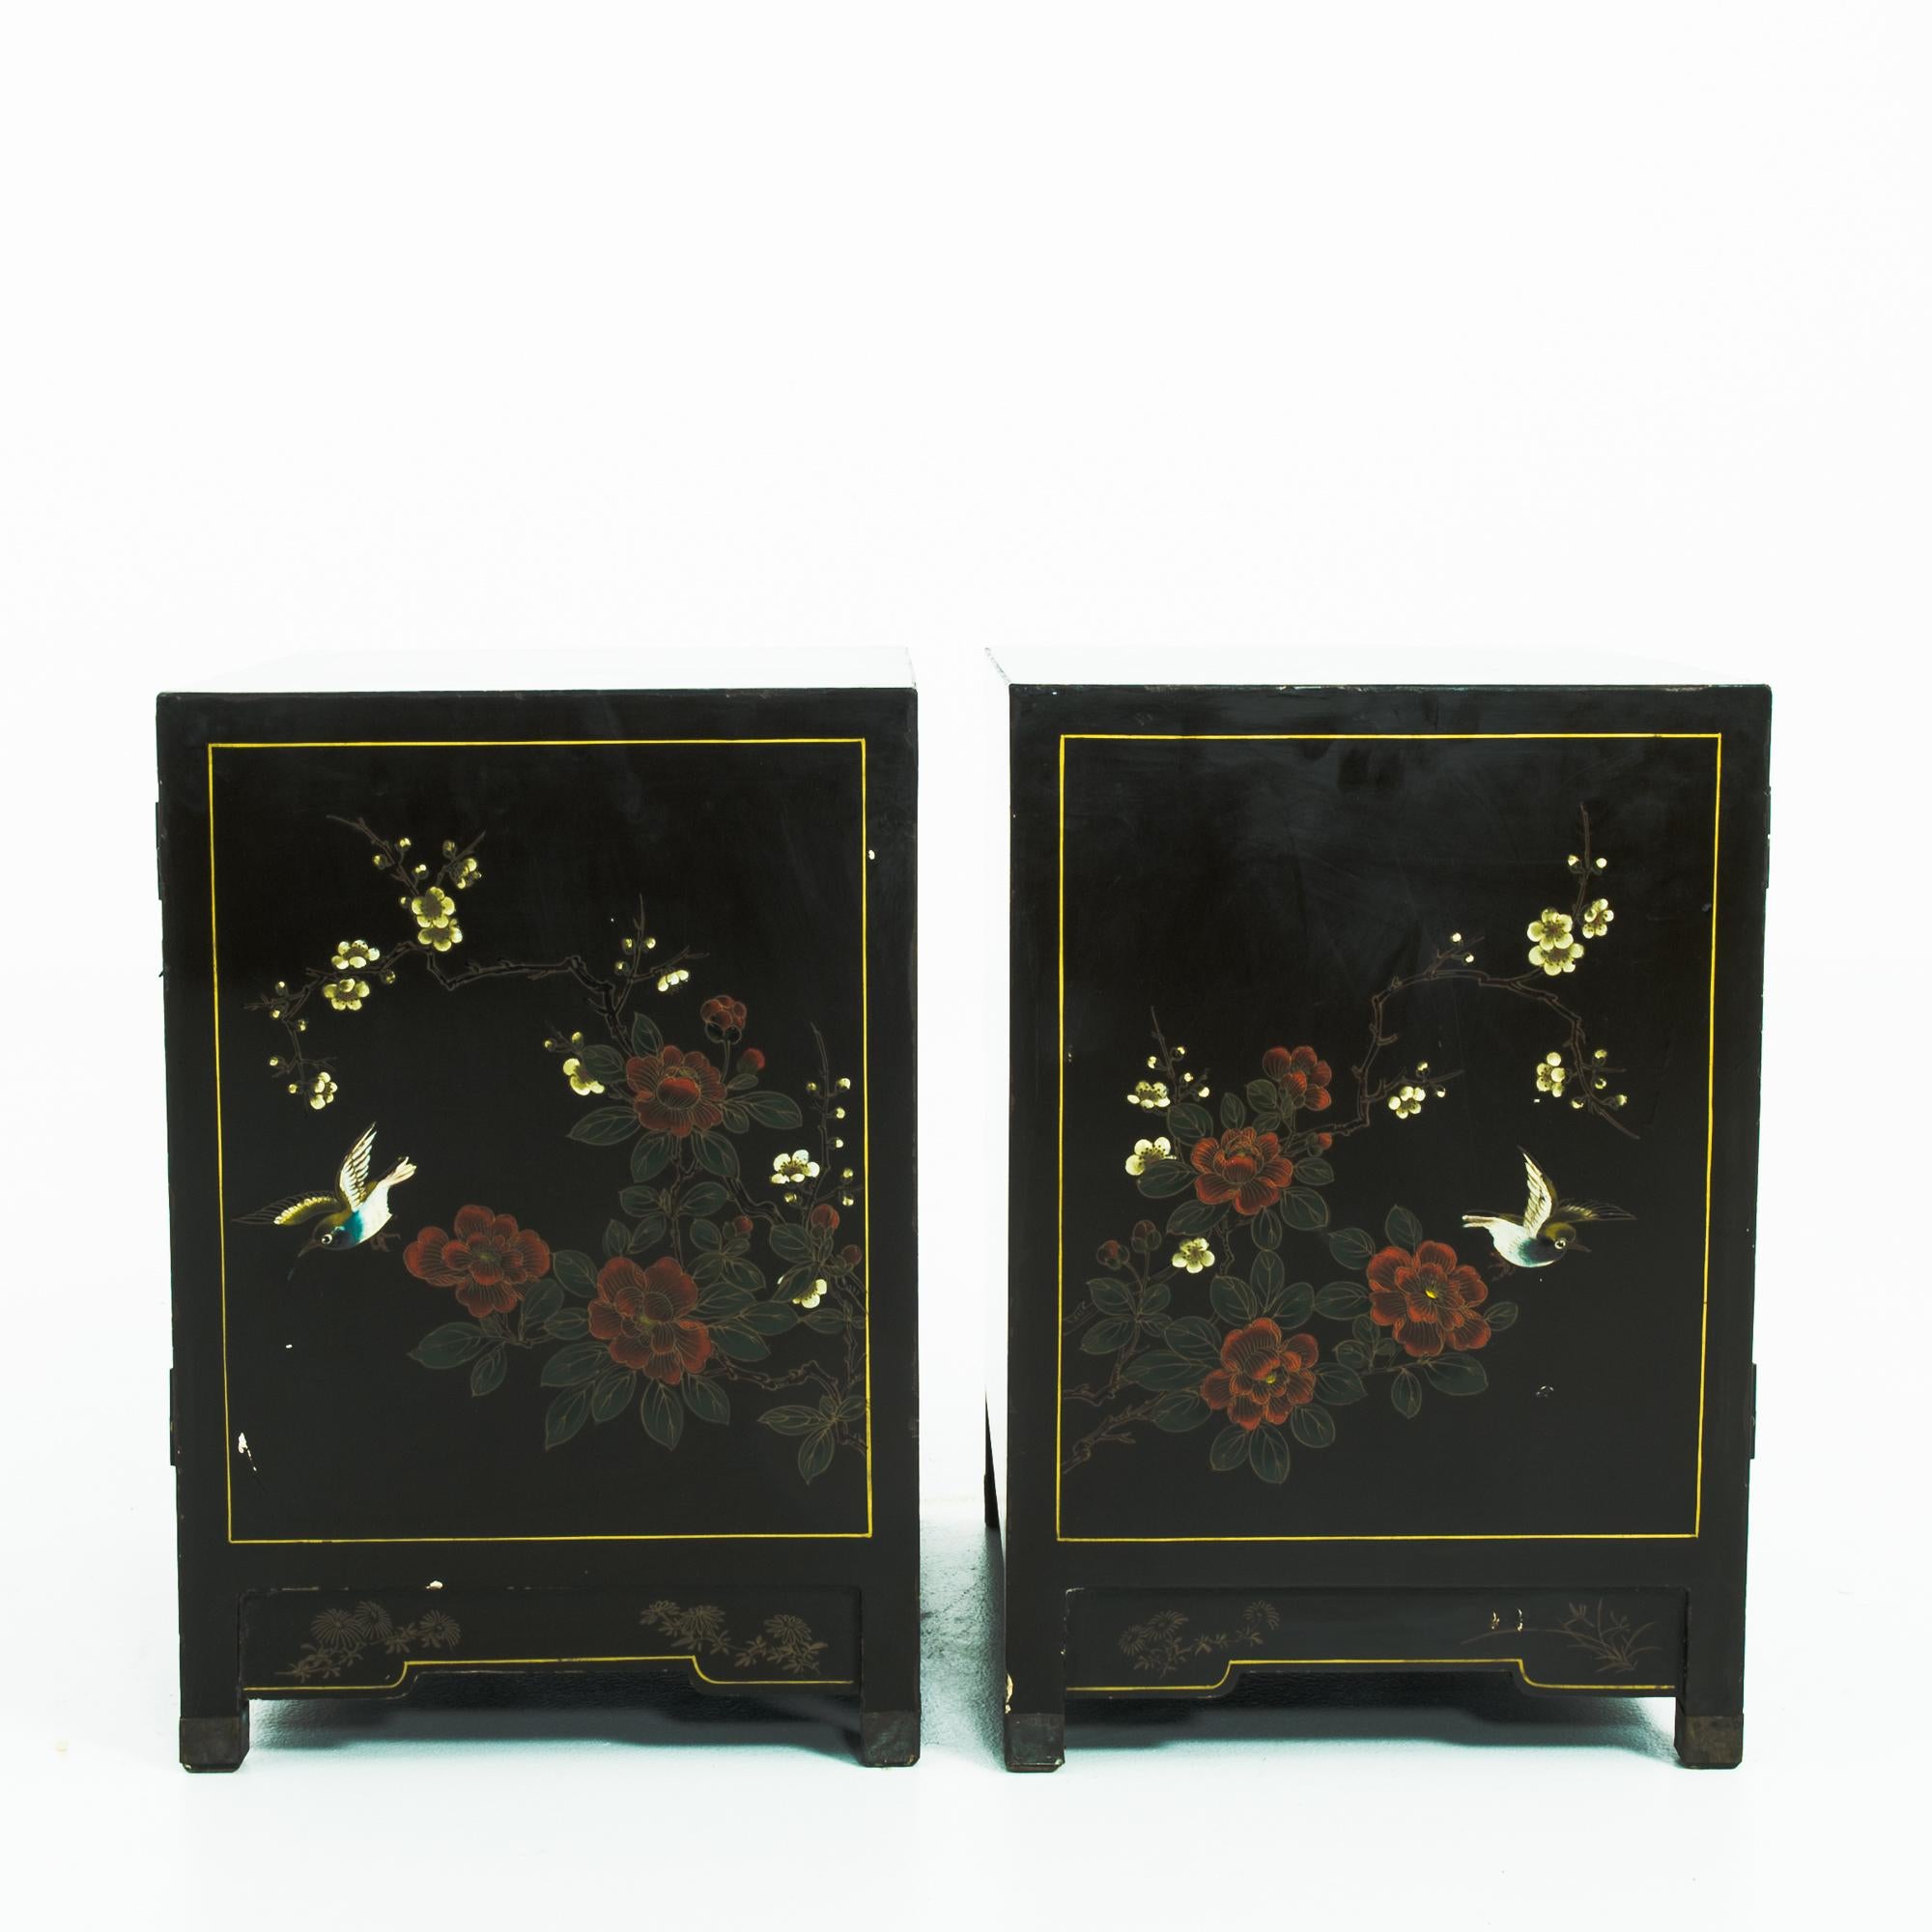 Hardwood 1960s Chinese Nightstands, a Pair